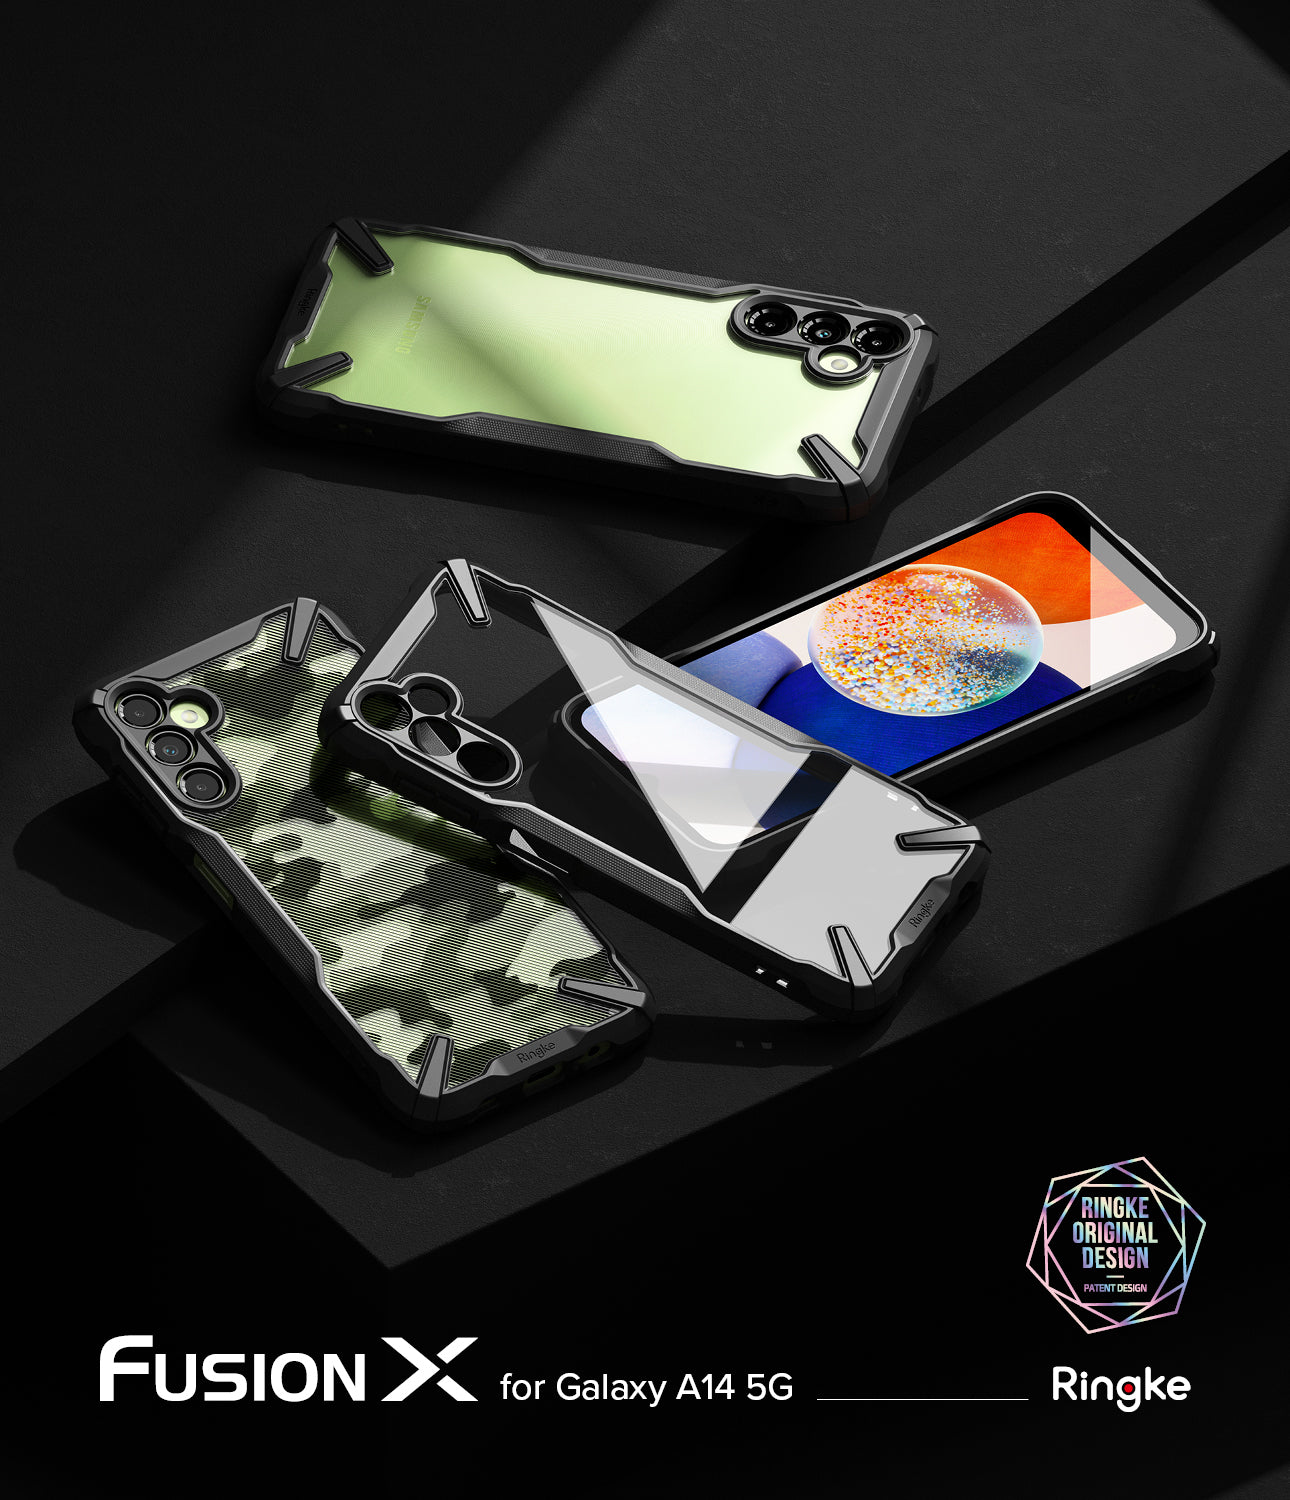 Fusion X for Galaxy A14 5G